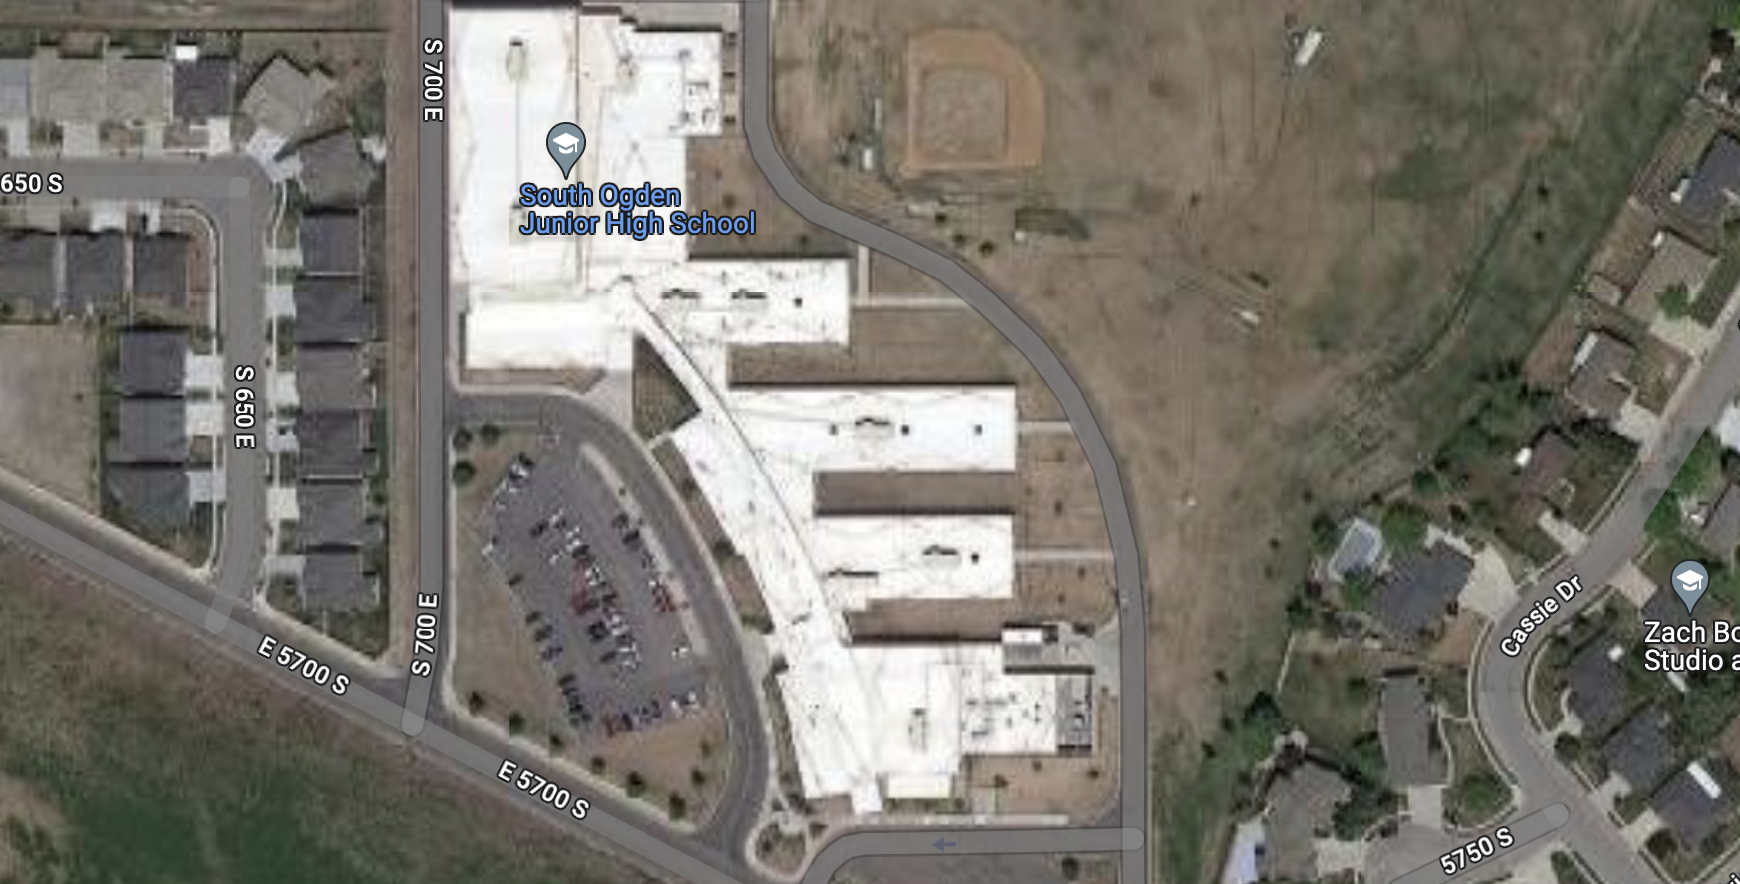 South Ogden Junior High School, as pictured on Google Maps....